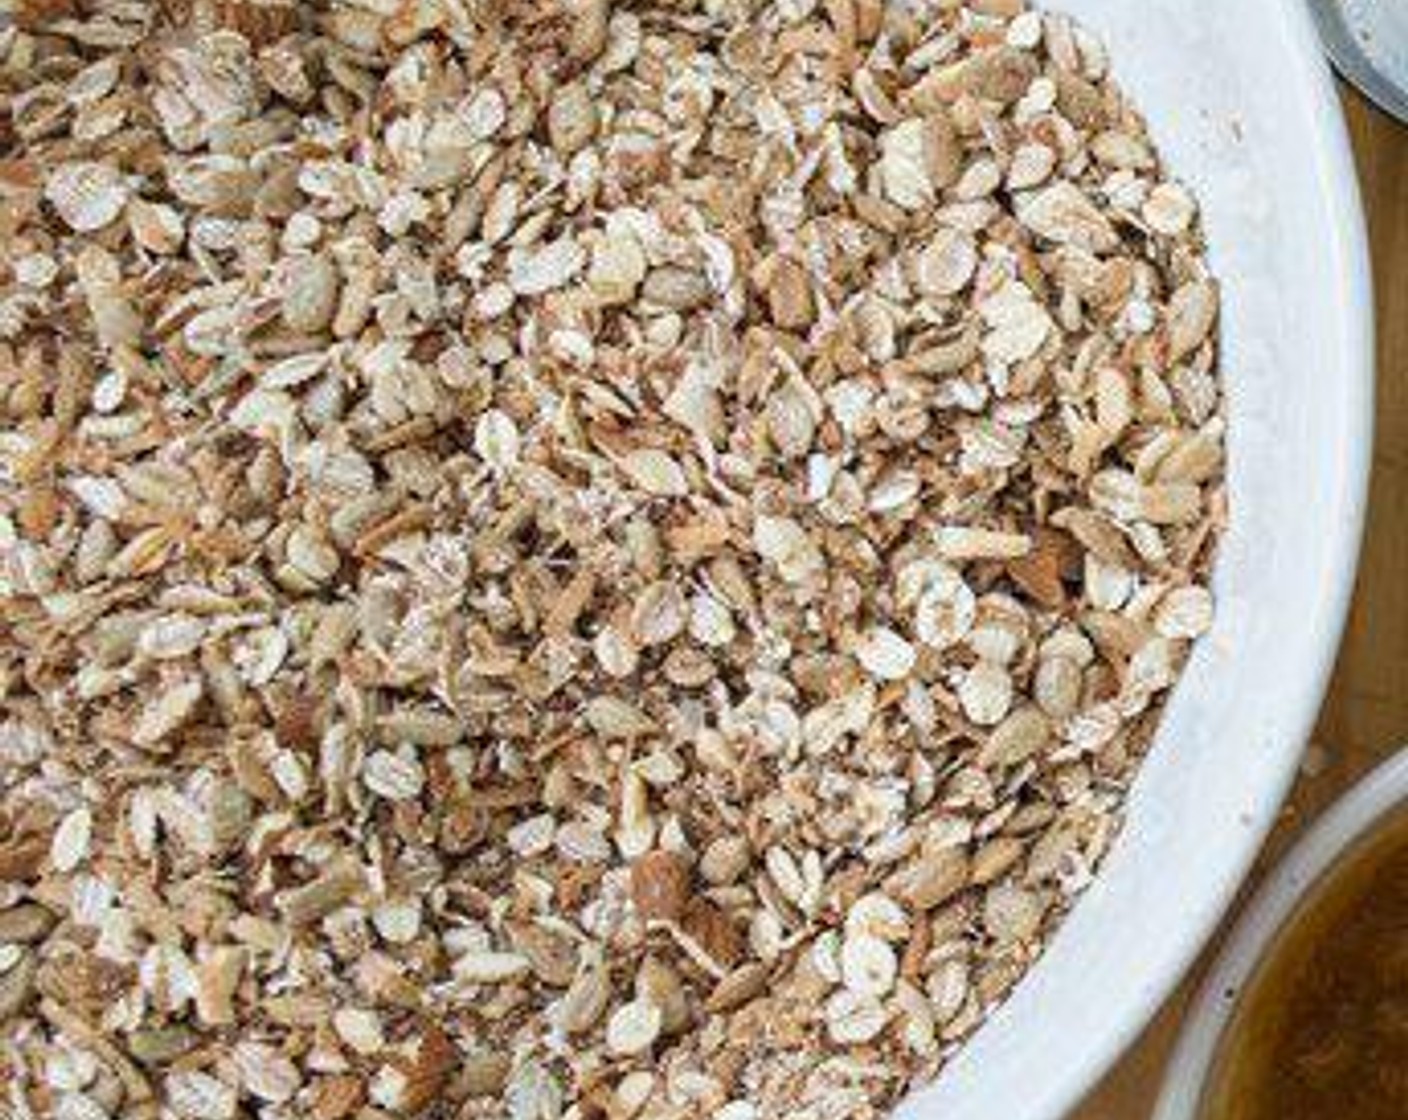 step 2 Combine Almonds (2/3 cup) Oats (1 3/4 cups) Ground Flaxseed (1/2 cup) Sunflower Seeds (1/2 cup) Coconut (1/2 cup) Ground Cinnamon (1/2 tsp) Pumpkin Pie Spice (1/4 tsp) Salt (1/2 tsp) in large bowl and stir.